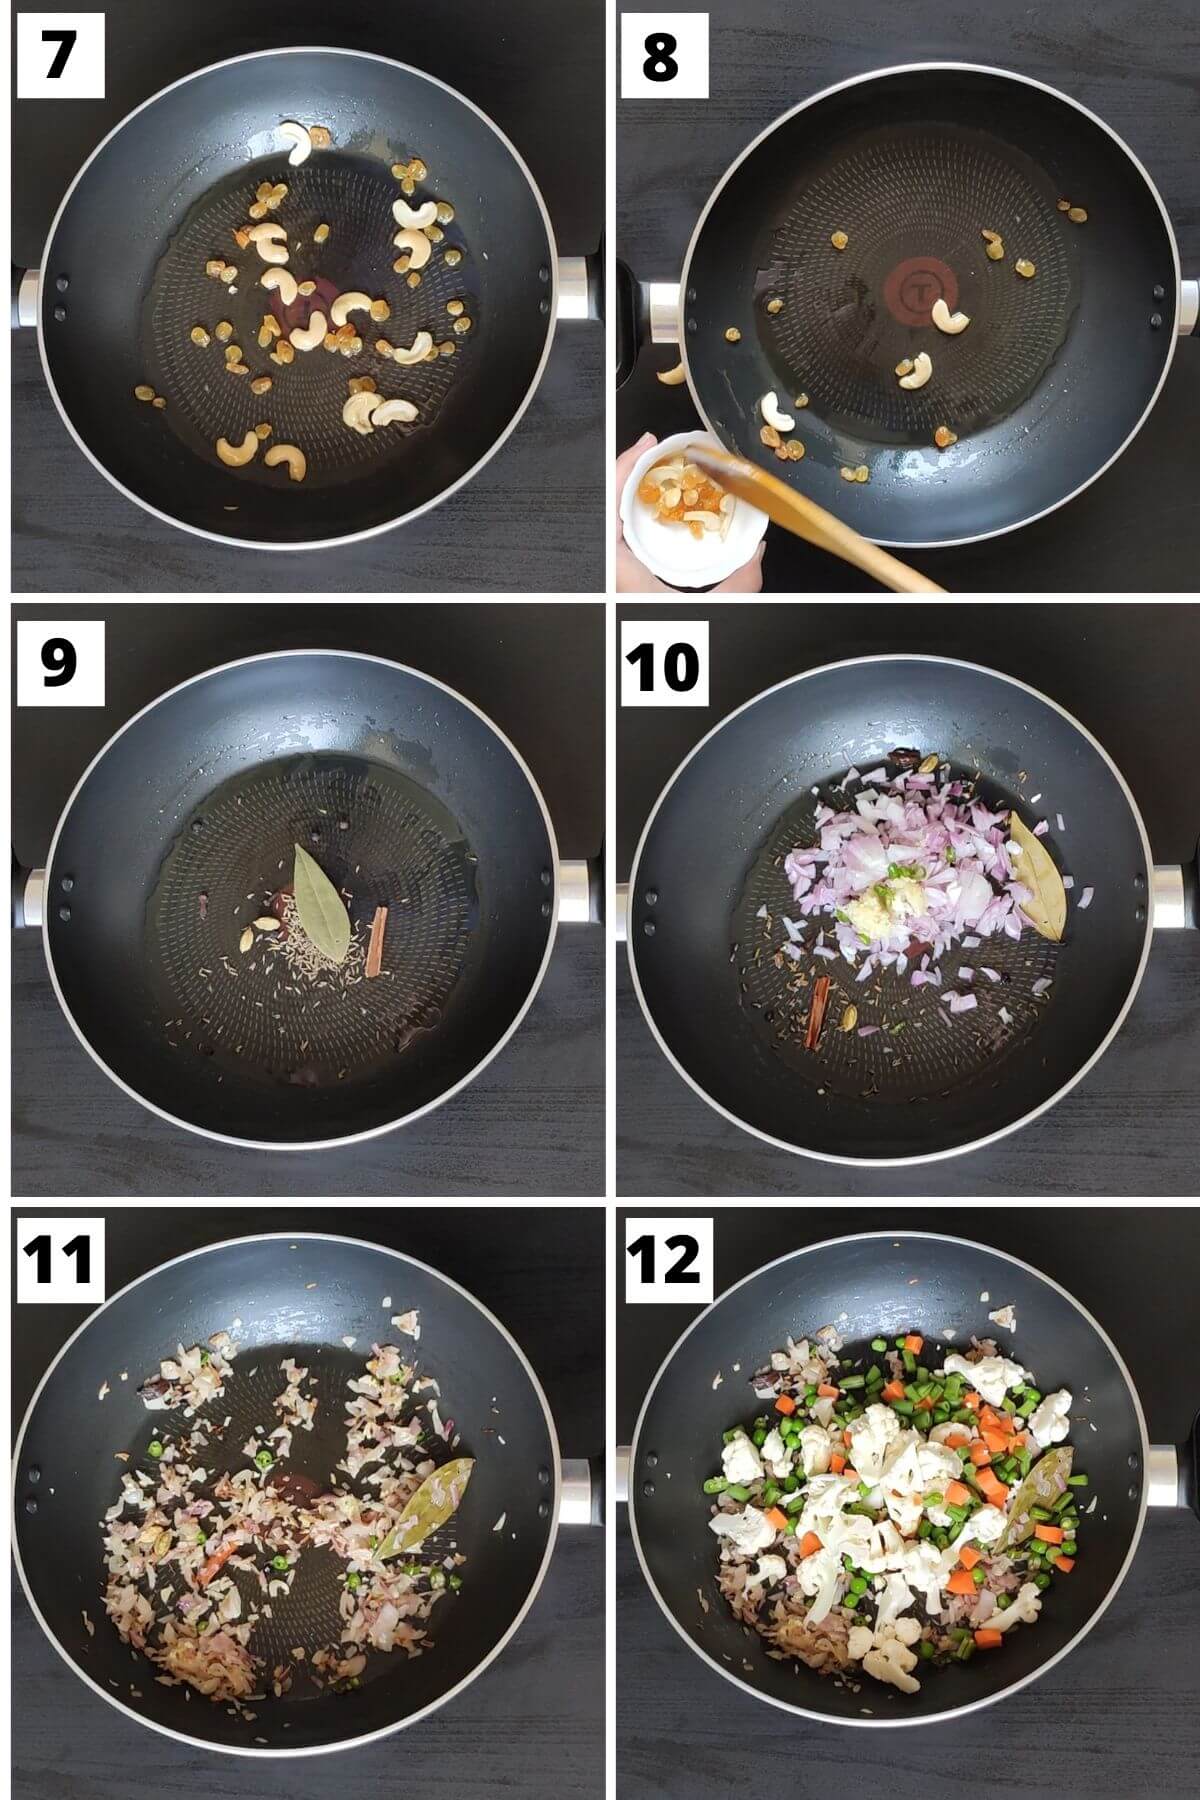 Steps to make curried quinoa